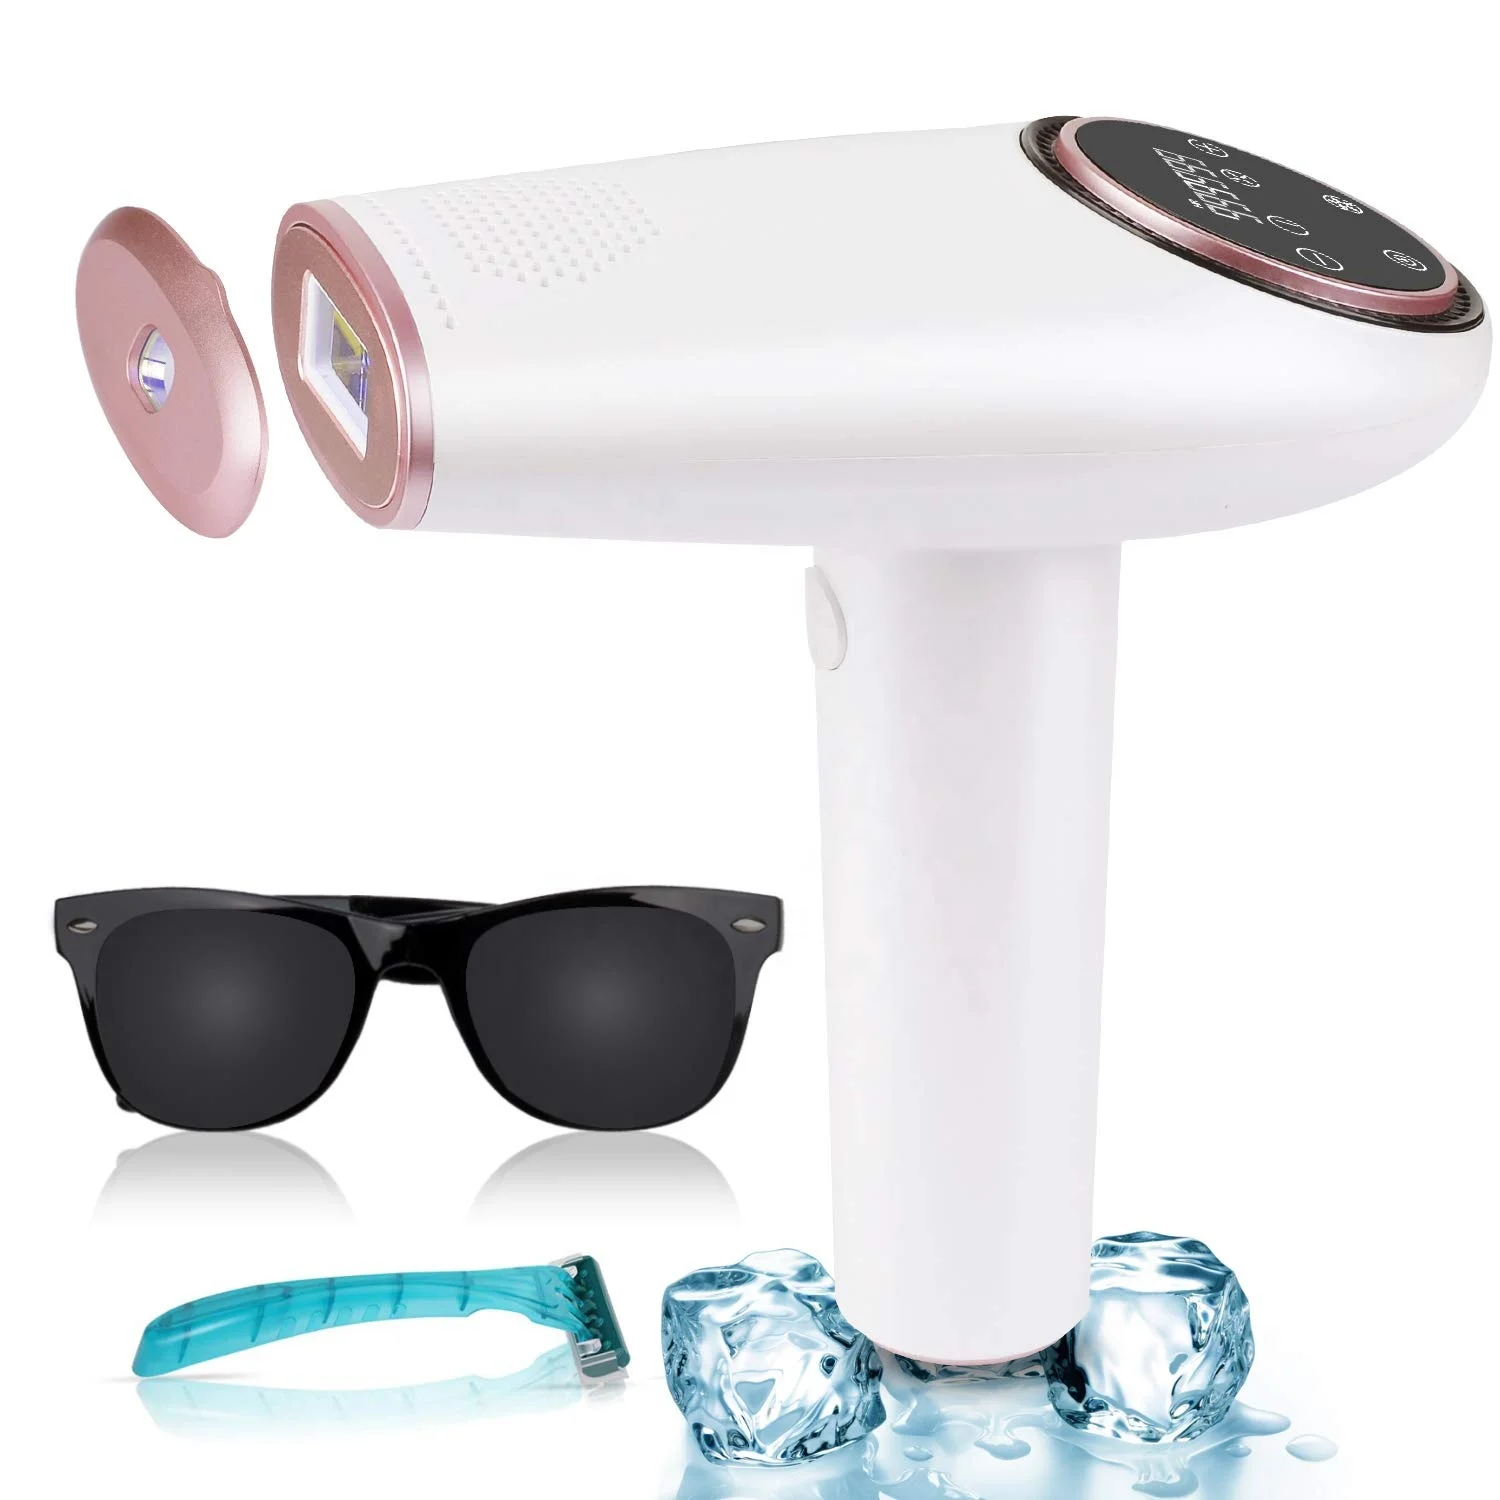 

Home use 999999 Flashes Painless IPL Hair Remover Skin Rejuvenation Ice Cool IPL laser Hair Removal